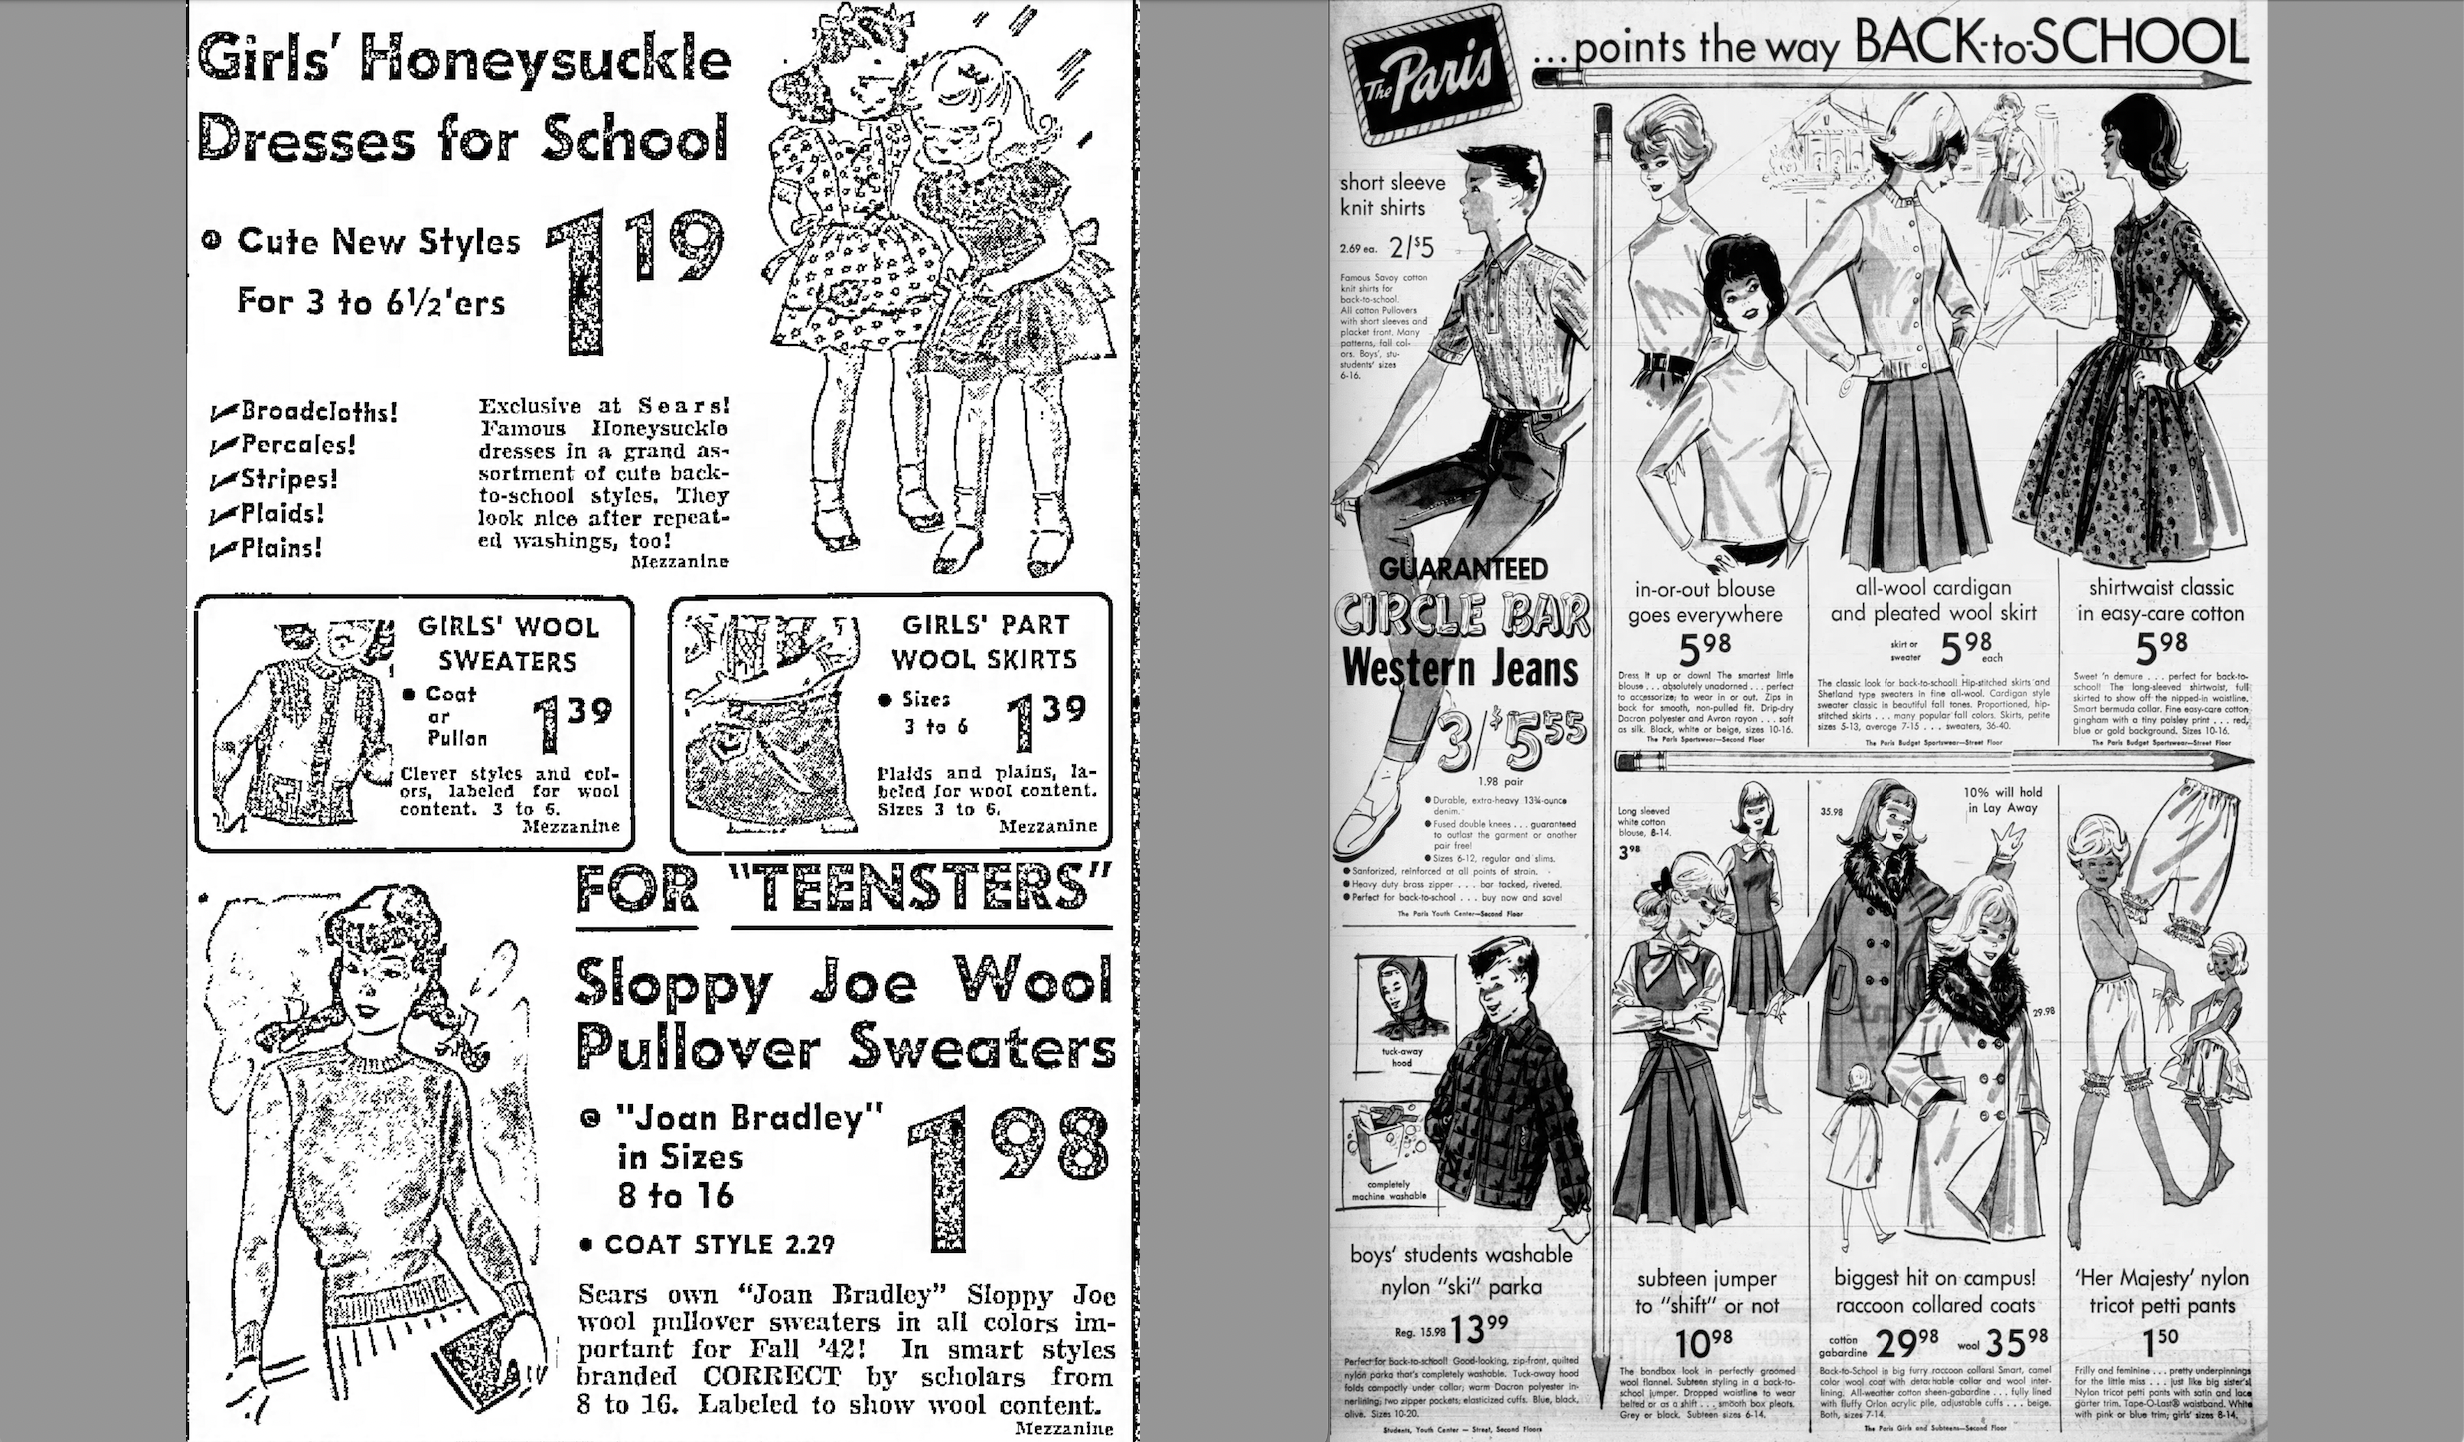 Newspaper ads feature back-to-school clothing for children and teens in 1942 and 1962.